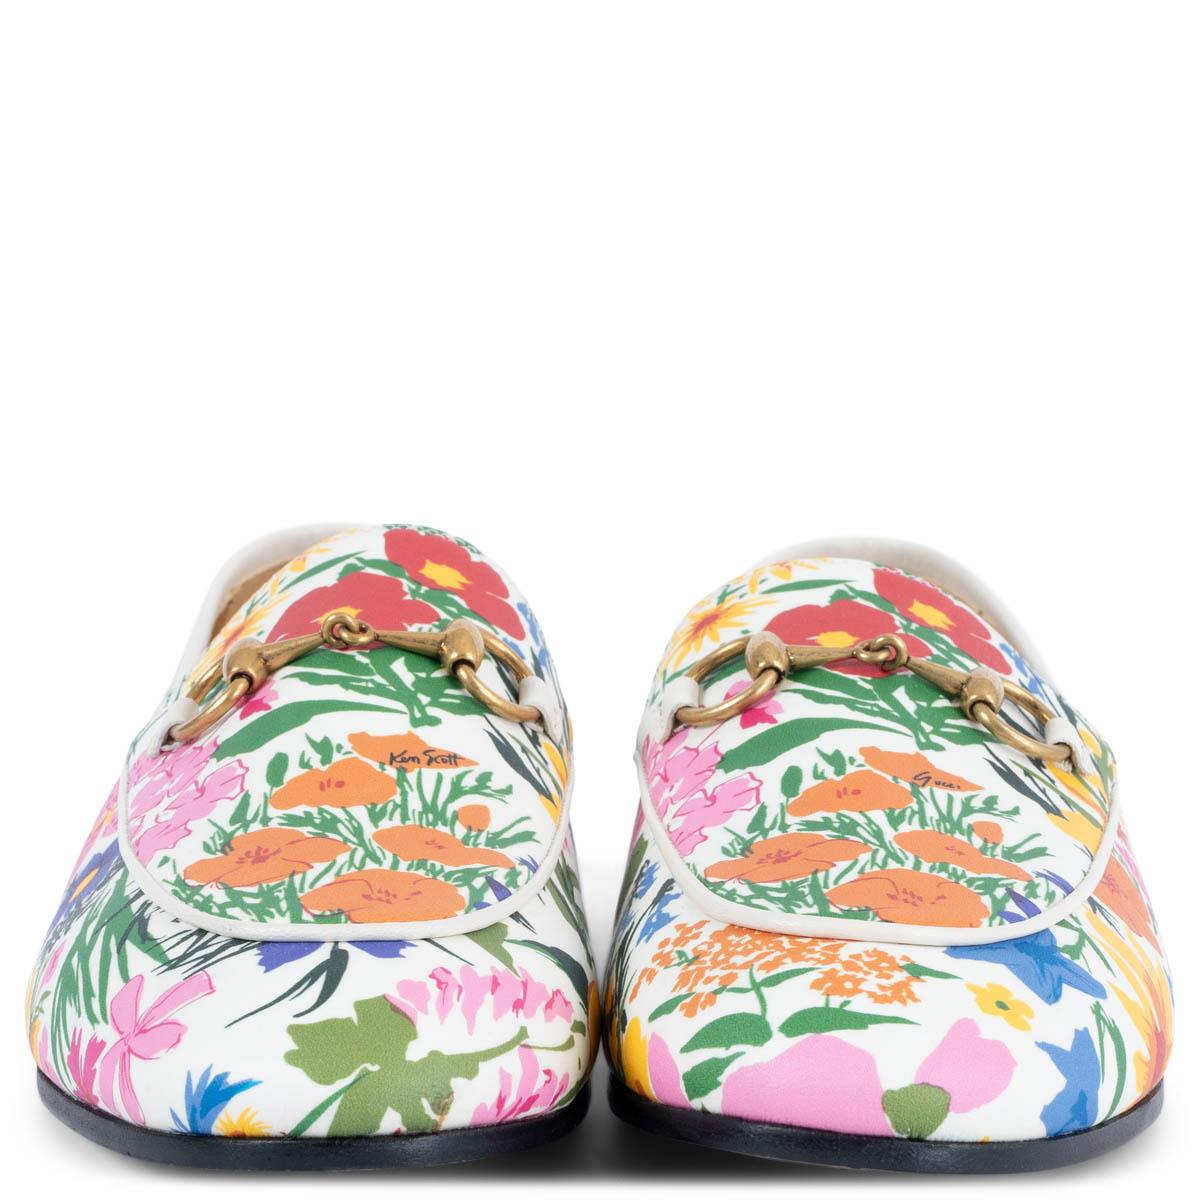 100% authentic Gucci x Ken Scott Jordaan multicolor flower print loafers on white leather with signature antique gold-tone horsebit. Brand new. 

Measurements
Imprinted Size	37
Shoe Size	37
Inside Sole	24.5cm (9.6in)
Width	7.5cm (2.9in)
Heel	1.5cm